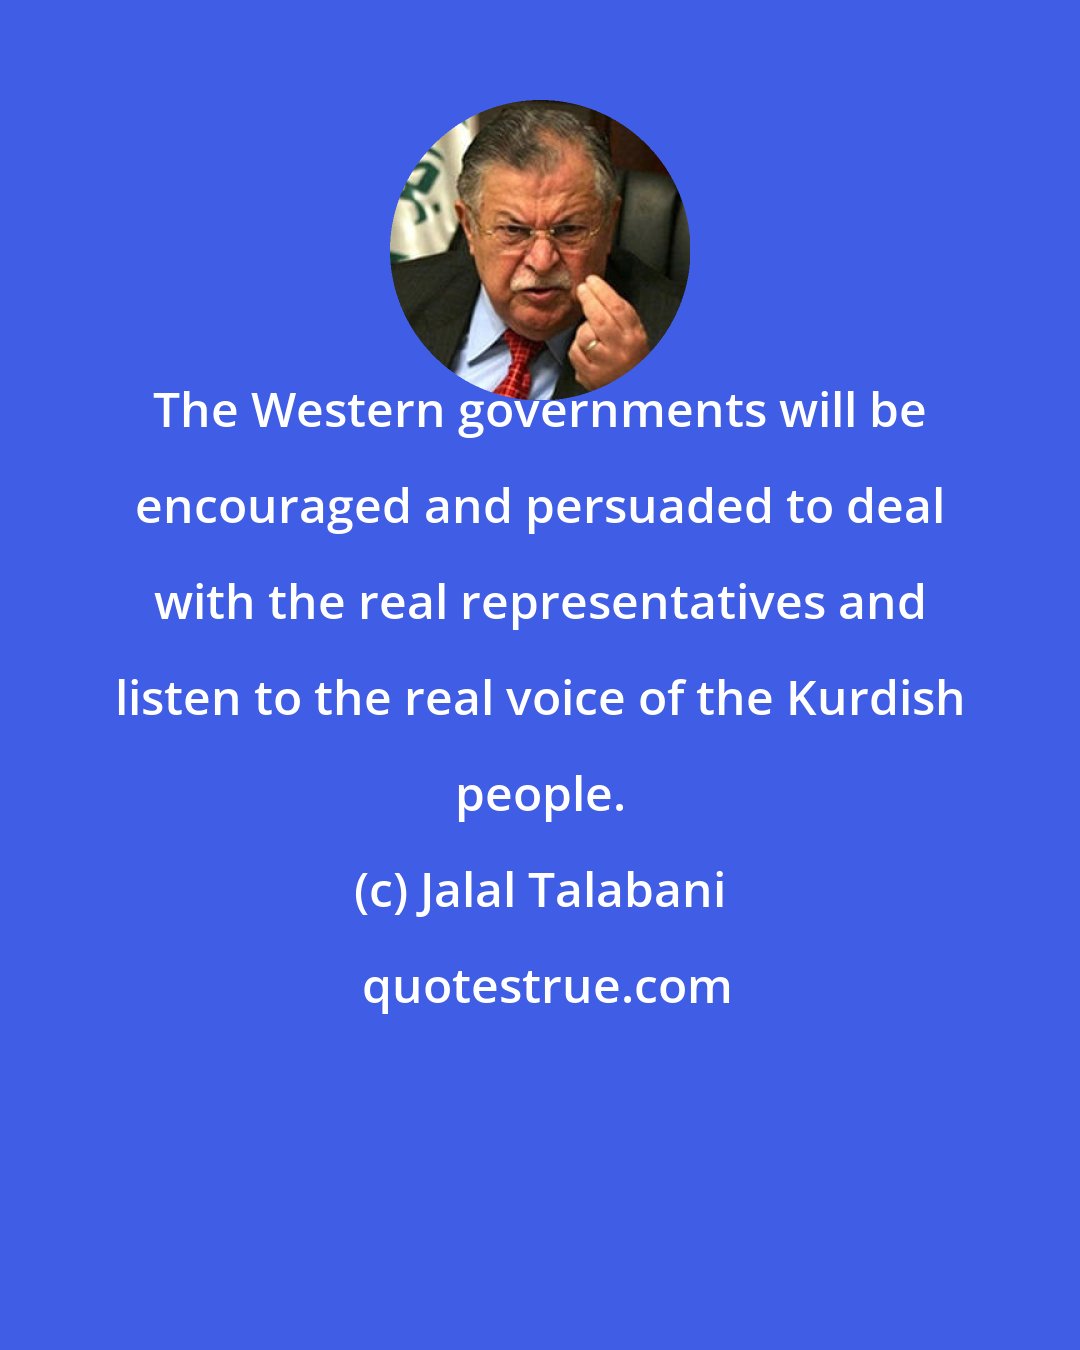 Jalal Talabani: The Western governments will be encouraged and persuaded to deal with the real representatives and listen to the real voice of the Kurdish people.